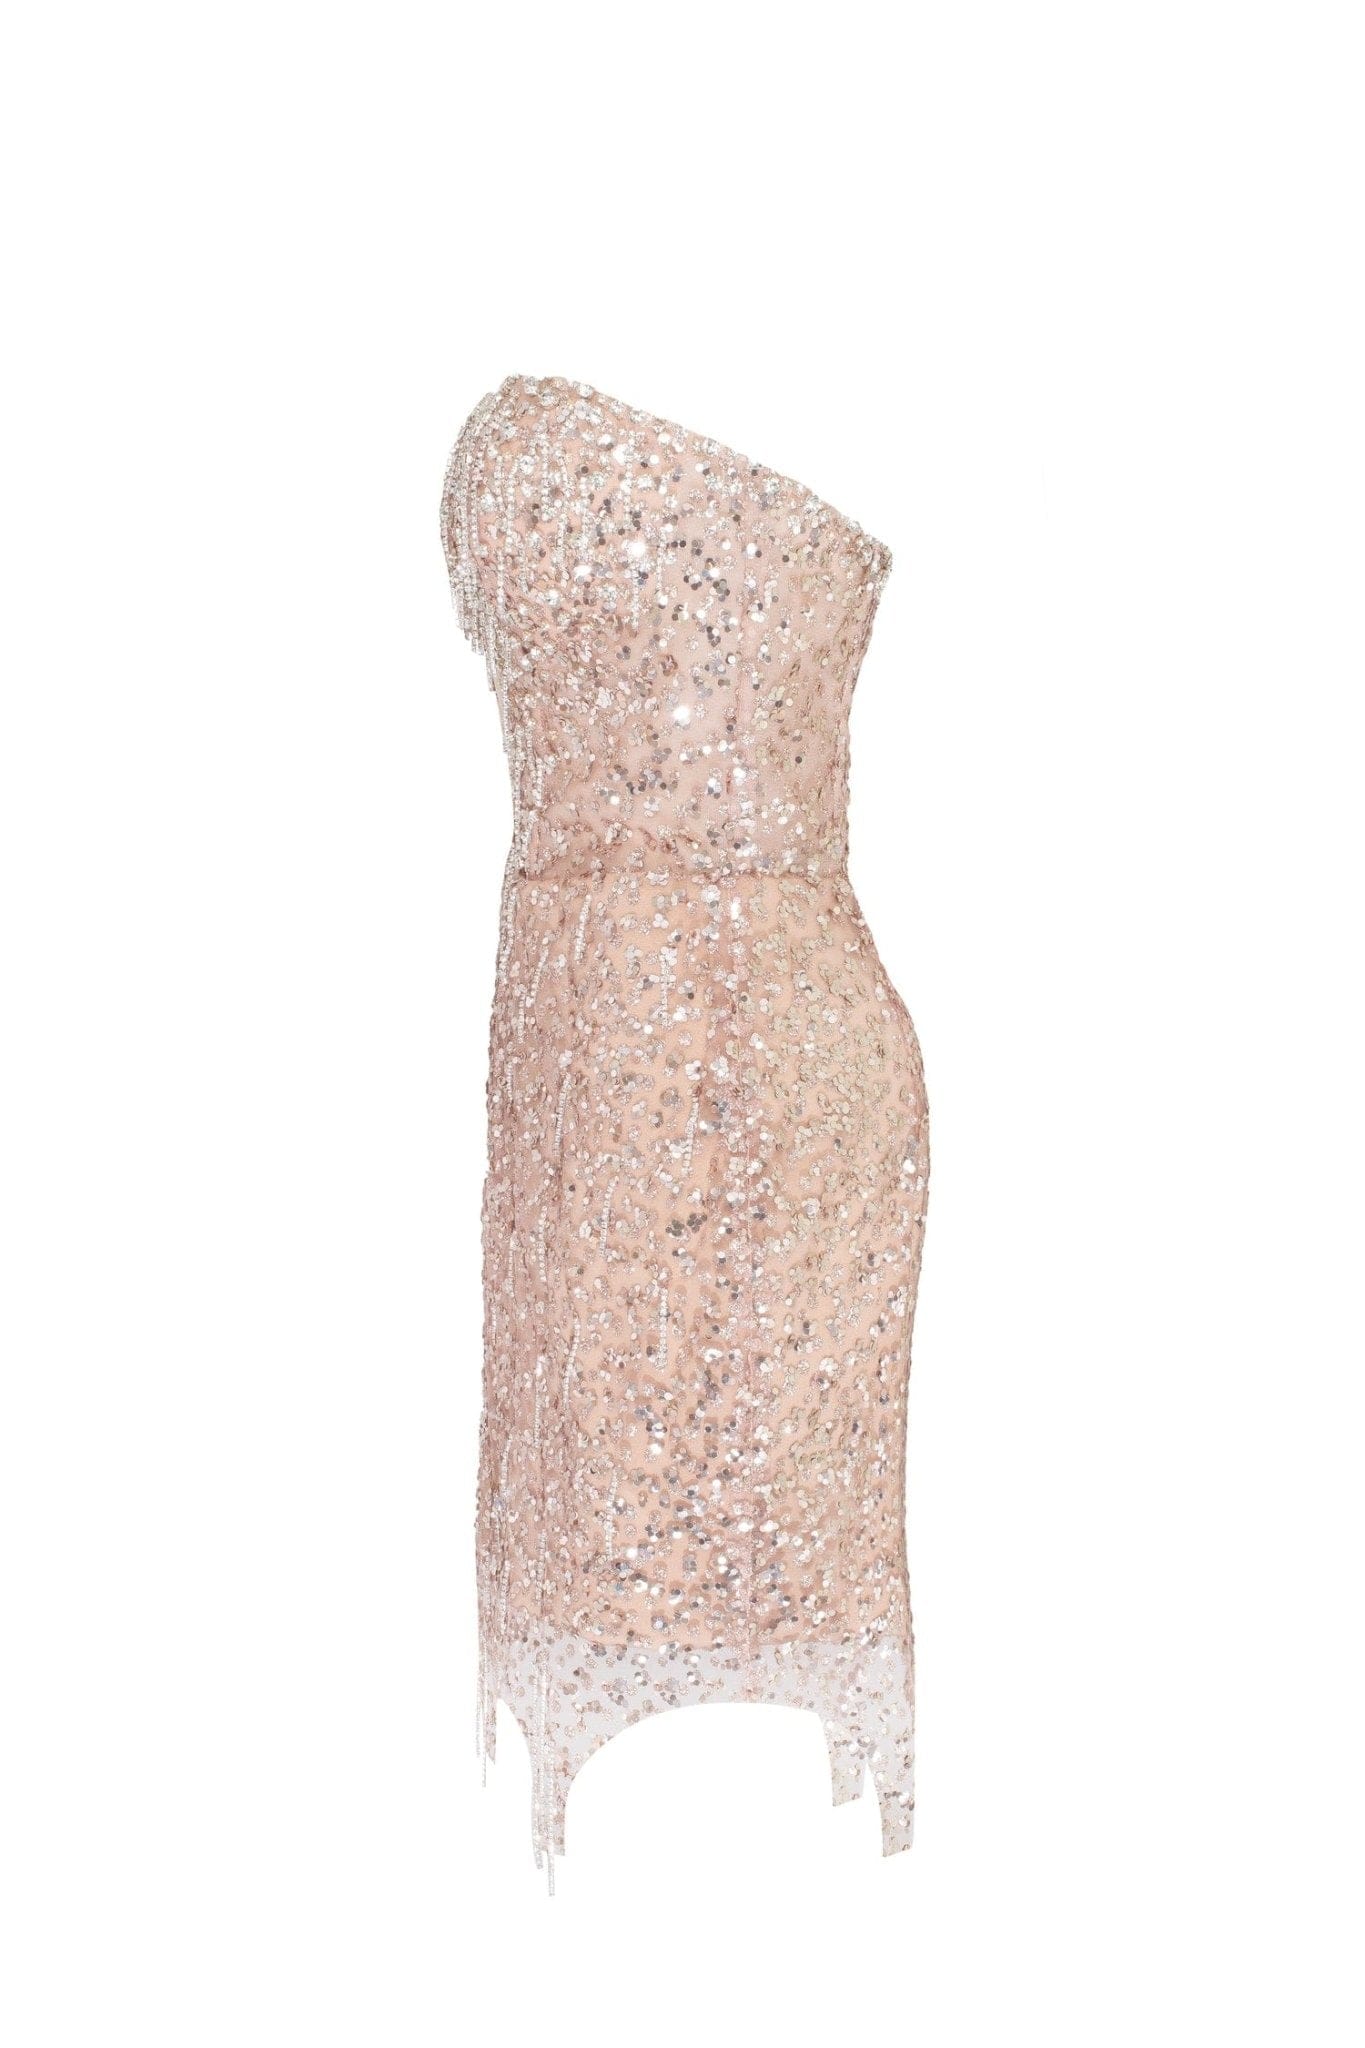 Spectacular sequined maxi gown on long spaghetti straps ➤➤ Milla